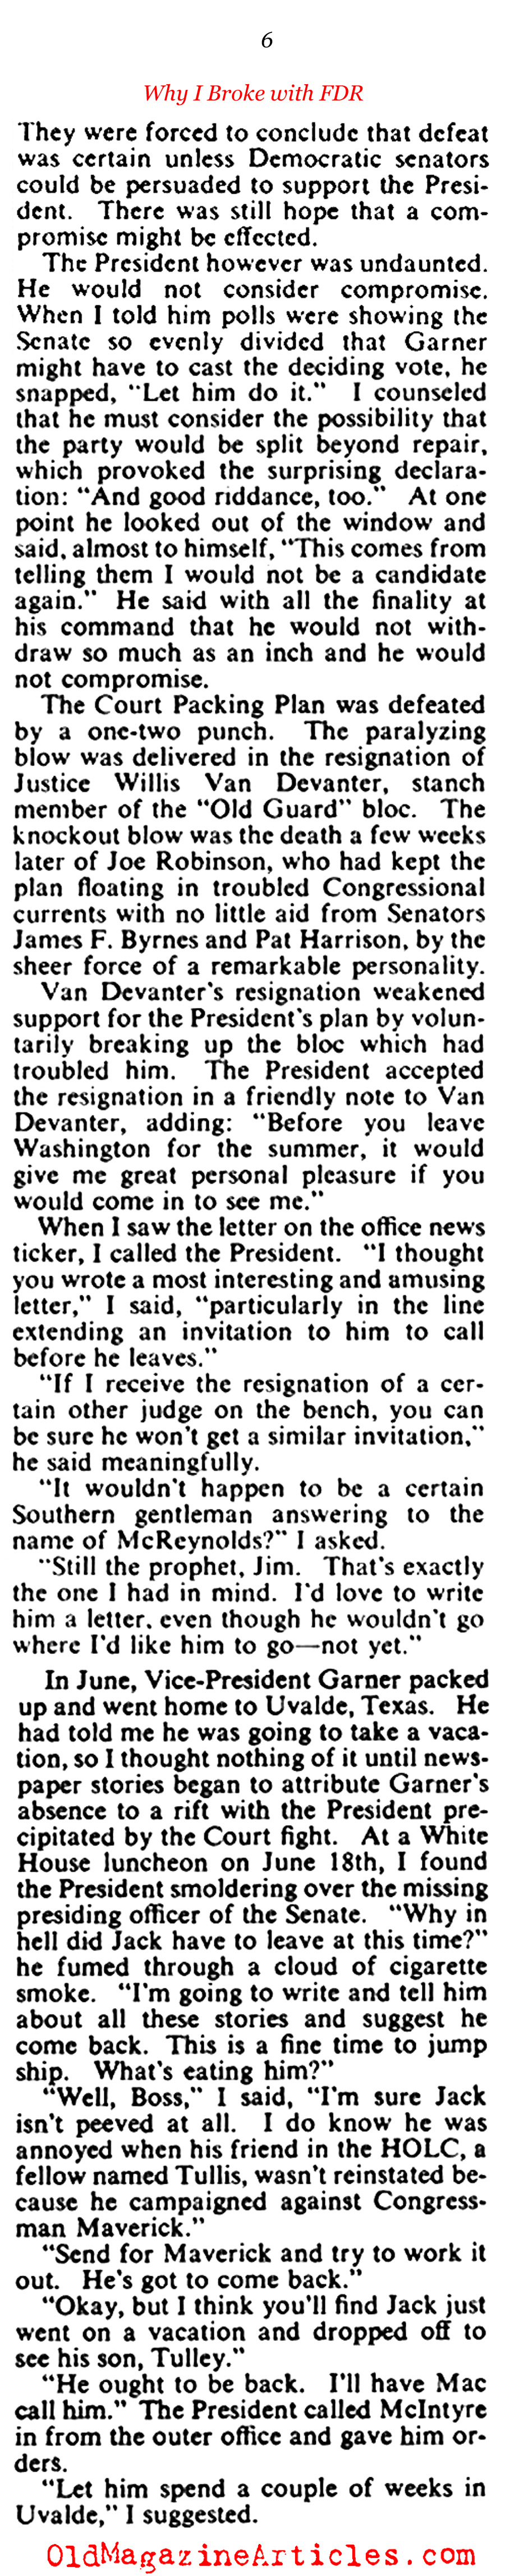 FDR, Congress and the Plan to Pack the Supreme Court (Collier's Magazine, 1947)